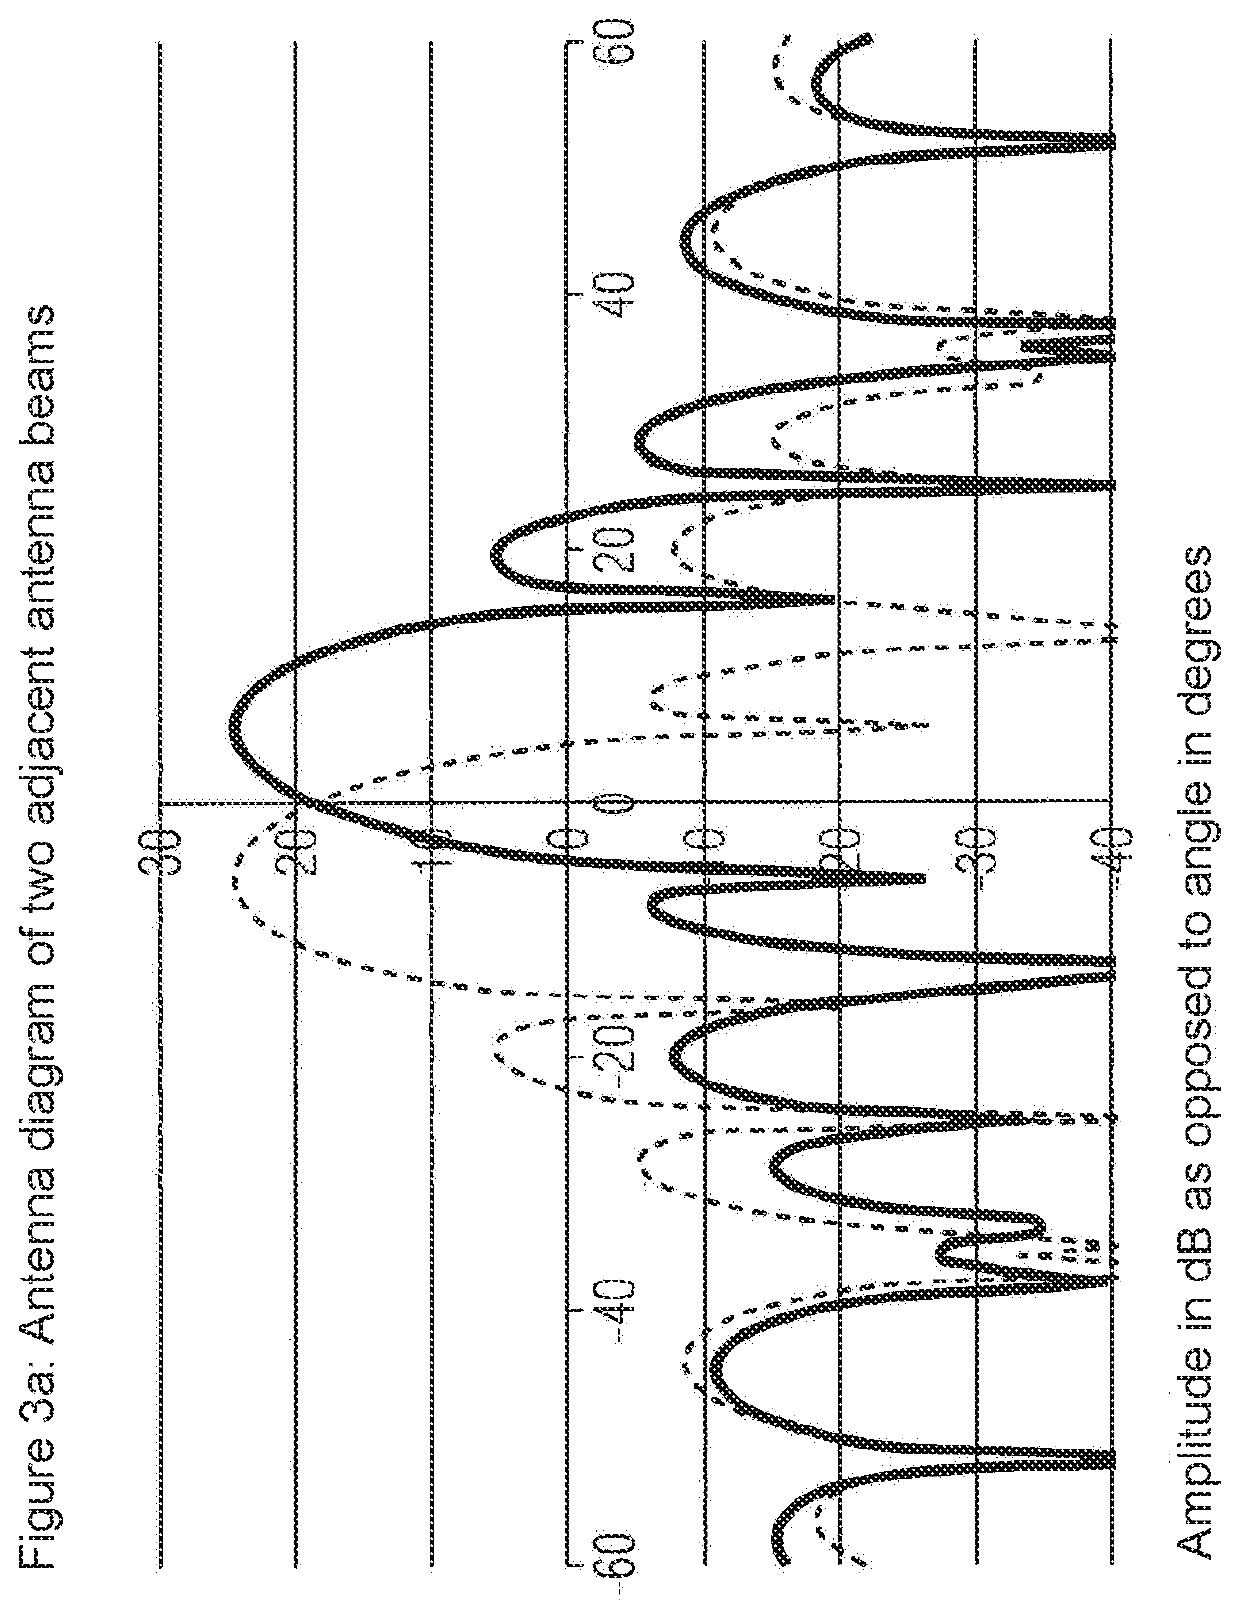 Imaging radar sensor with horizontal digital beam forming and vertical object measurement by phase comparison in mutually offset transmitters